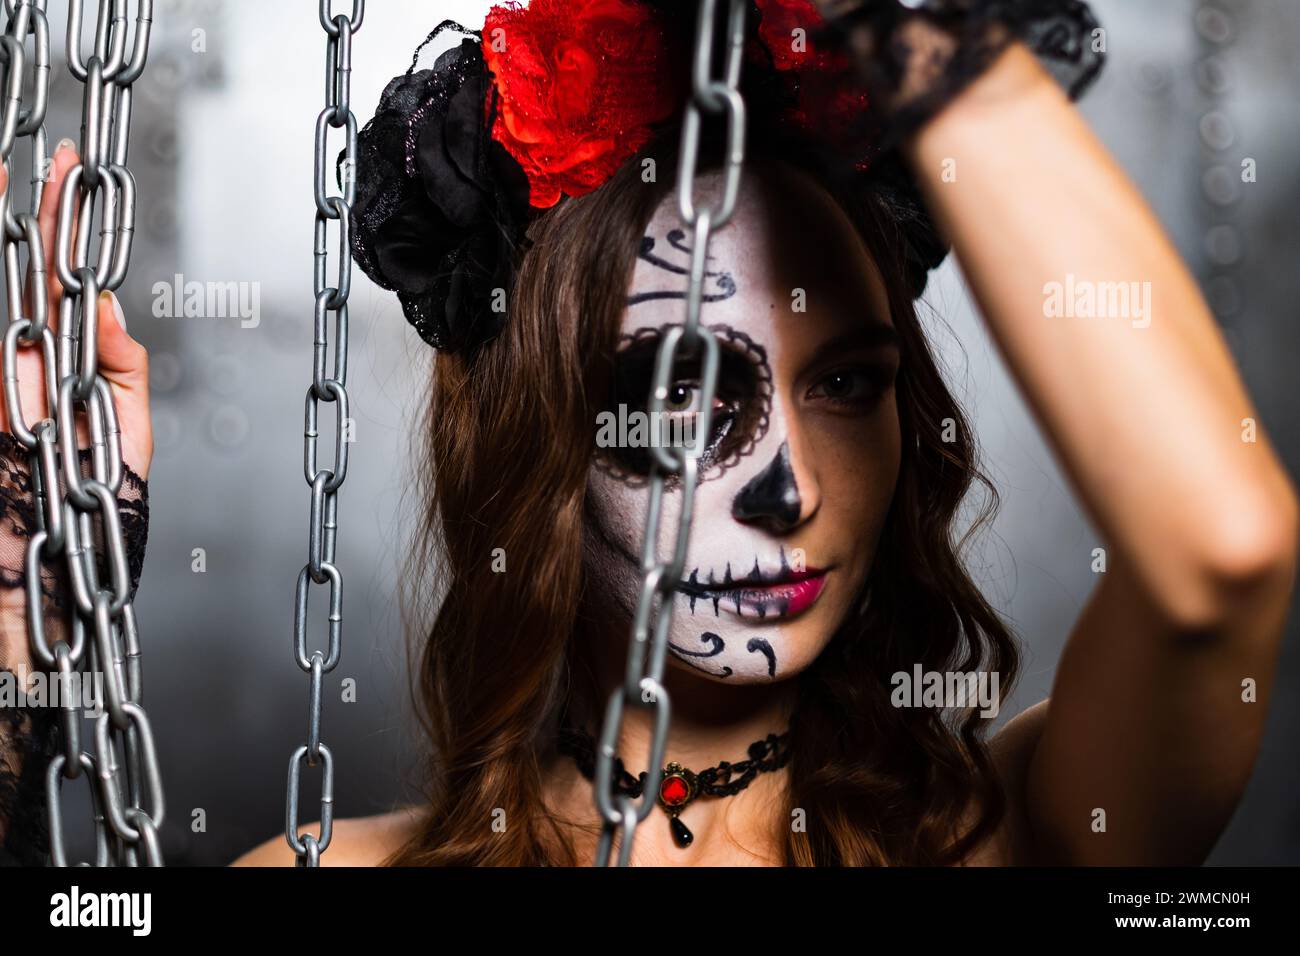 A woman with striking skull makeup peers through hanging chains, her eyes telling a story of mystique. The red and black floral headpiece contrasts with the industrial setting. Stock Photo